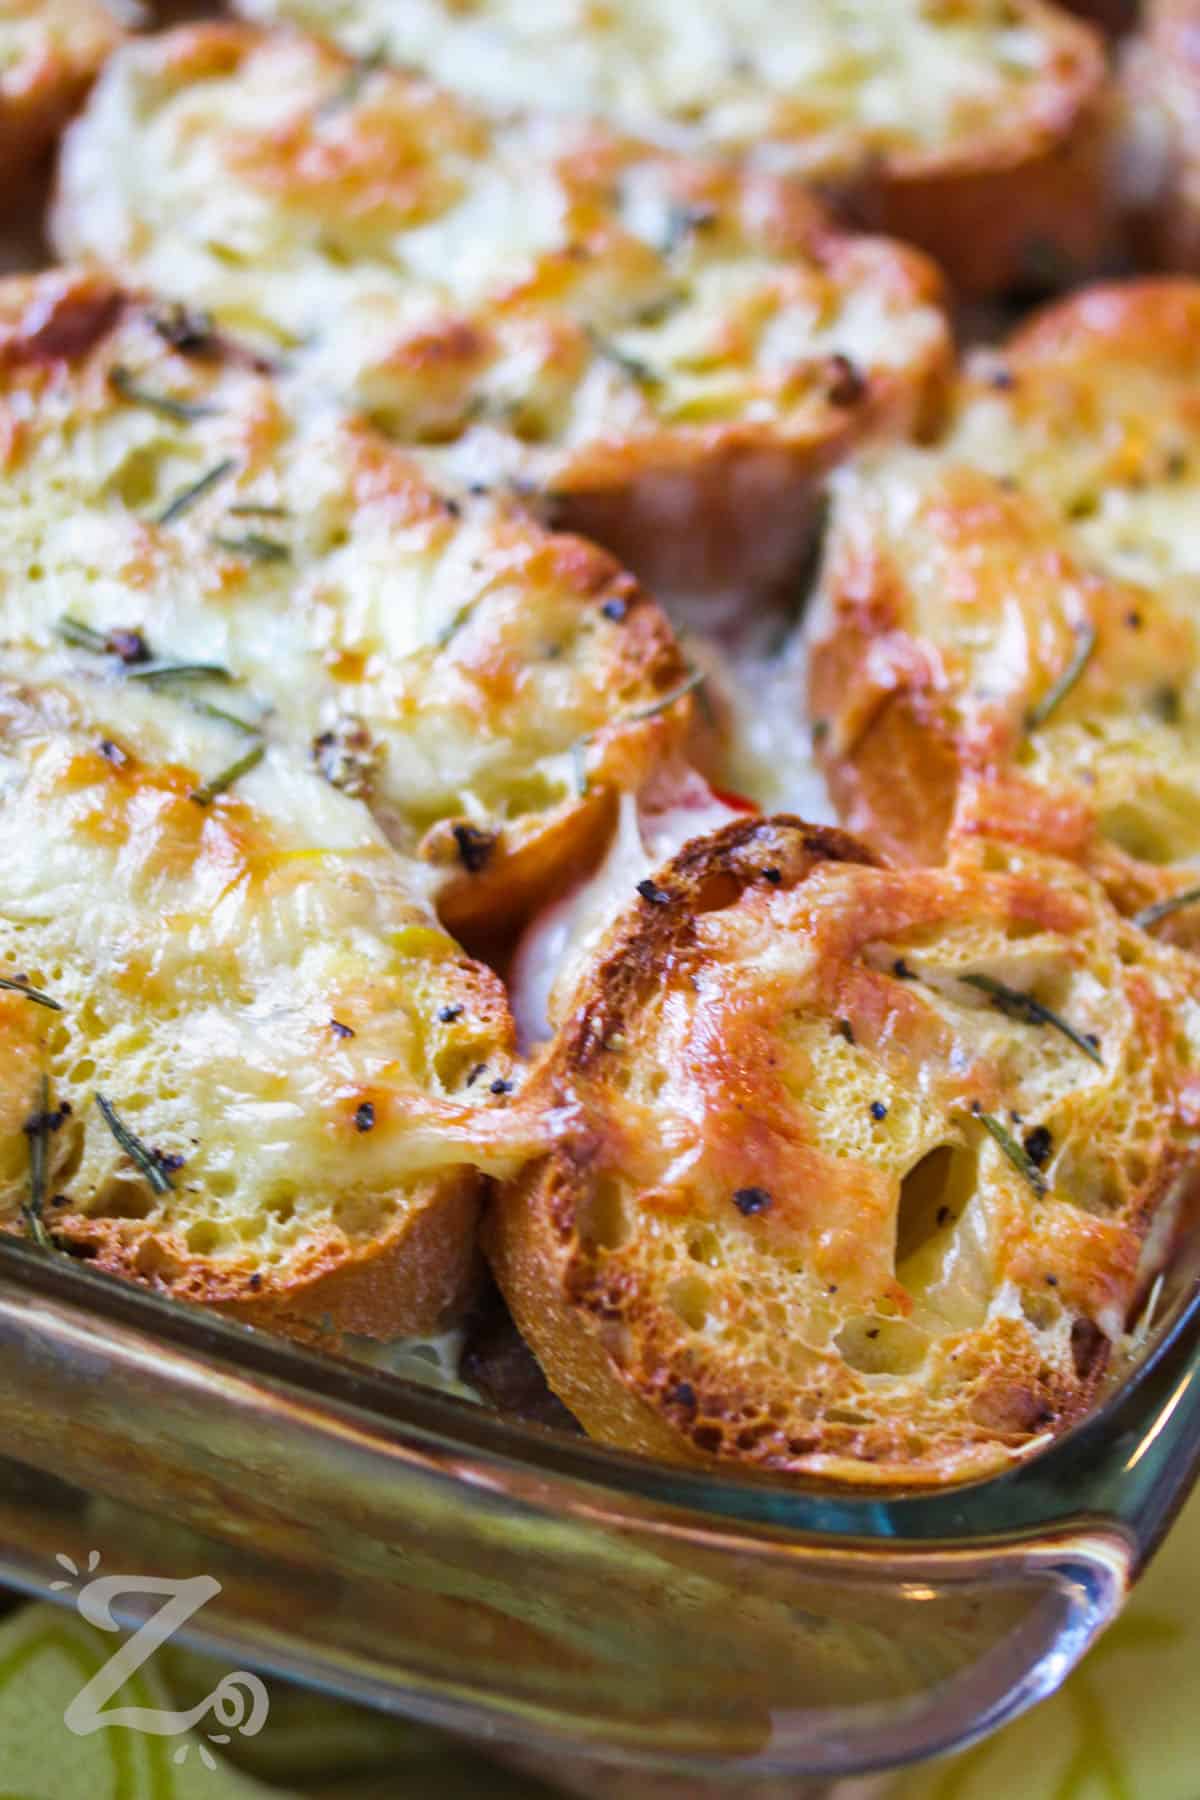 Breakfast strata with sausage baked in a glass casserole dish